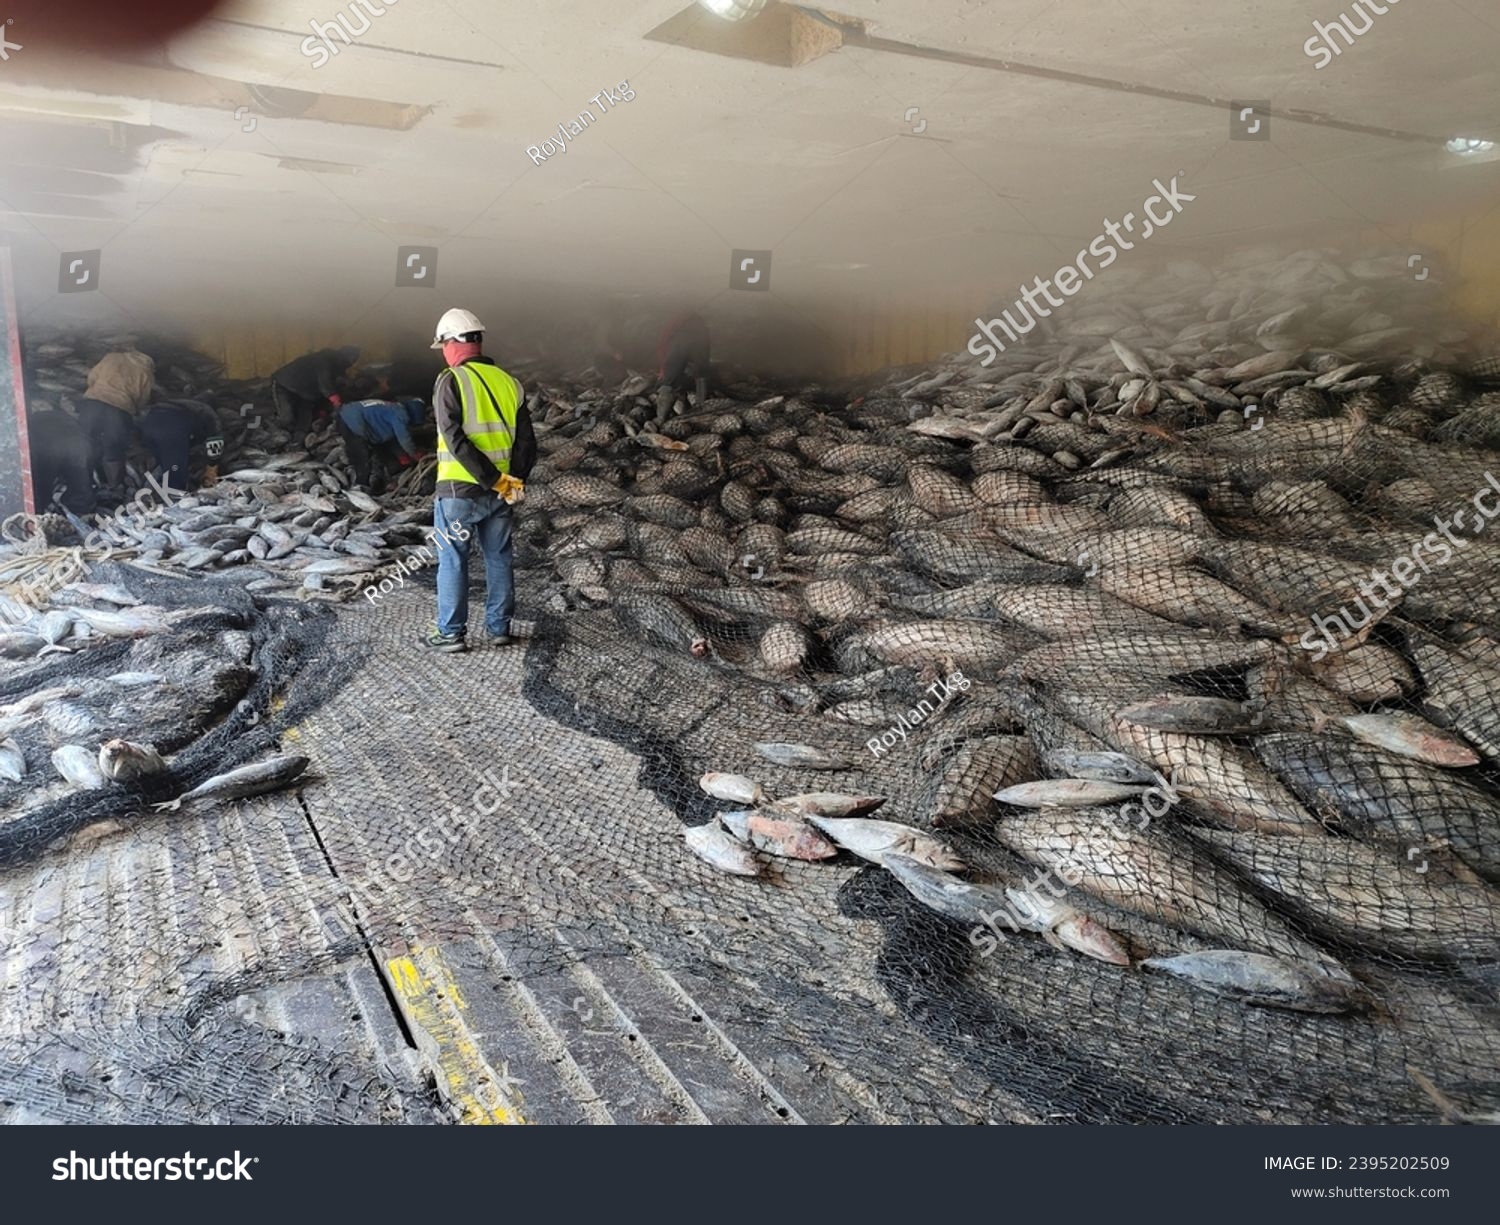 During transshipment frozen Yellowfin and Skipjack tuna inside large net, Loading and unloading from ship to factory. Located in the port area and import, working control, transport cargo concept #2395202509